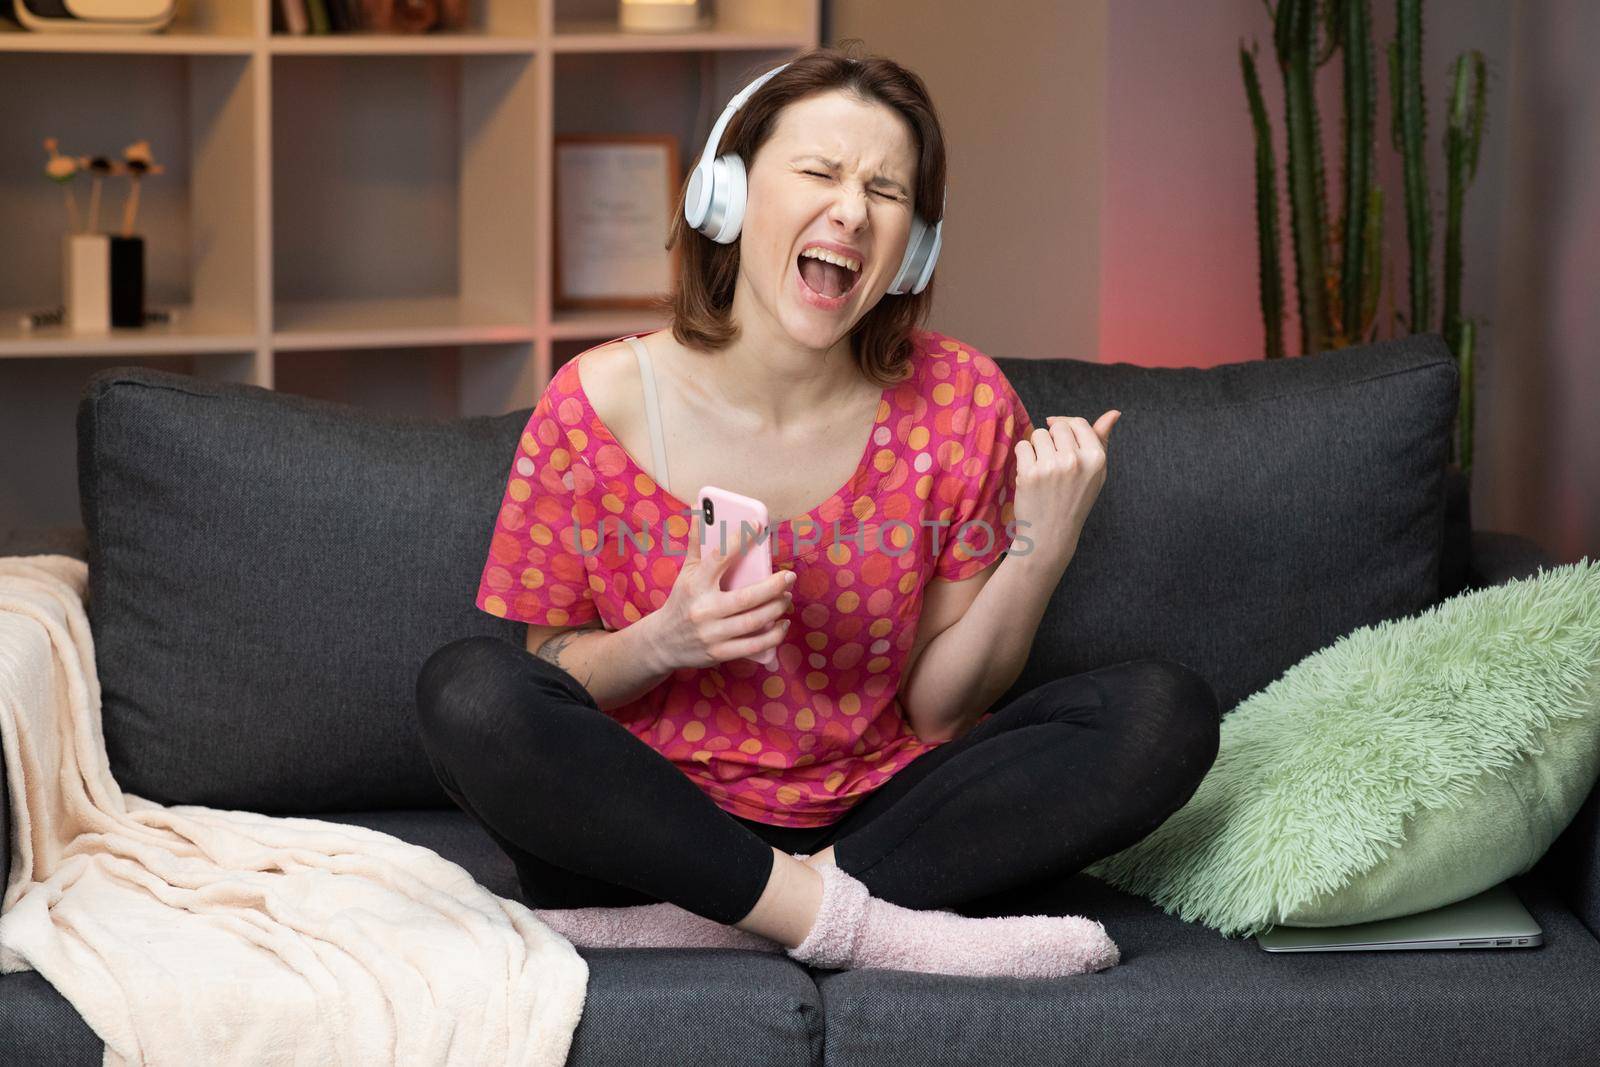 Caucasian girl sitting on sofa in home, smiling and listening to music in headphones on modern smartphone